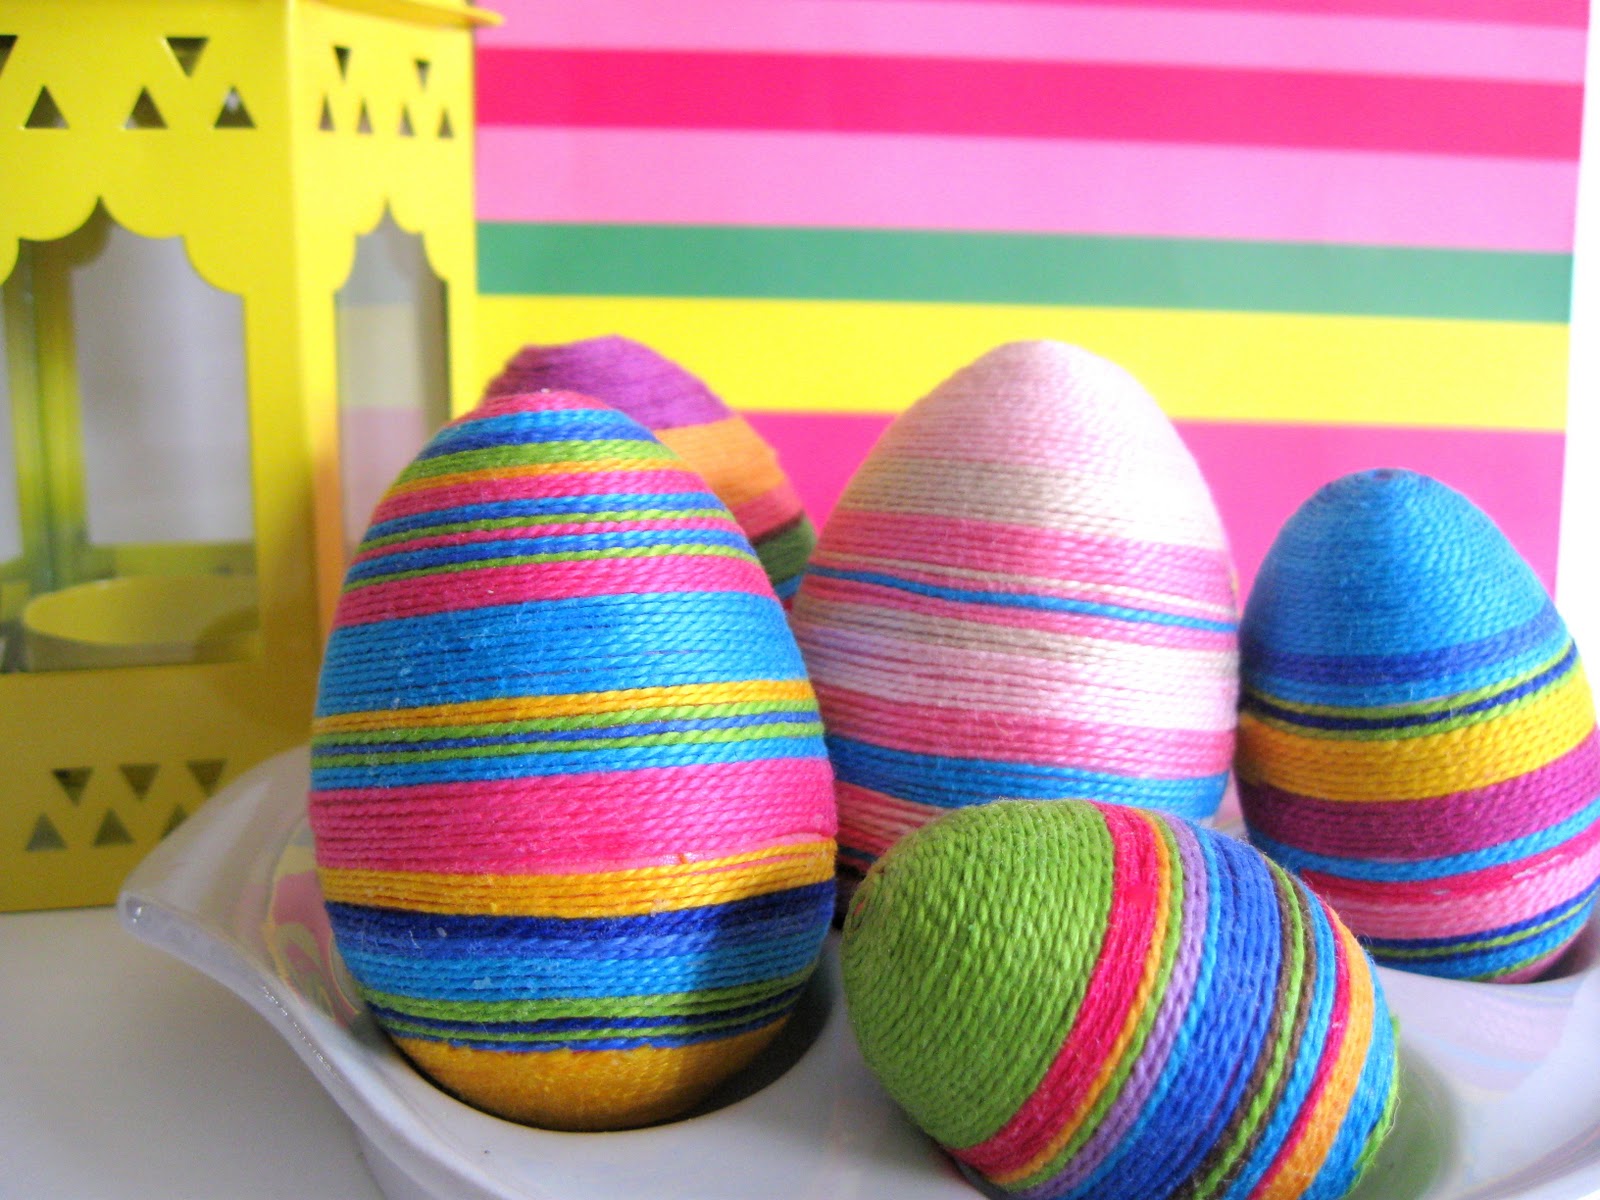 Embroidery Floss Covered Eggs